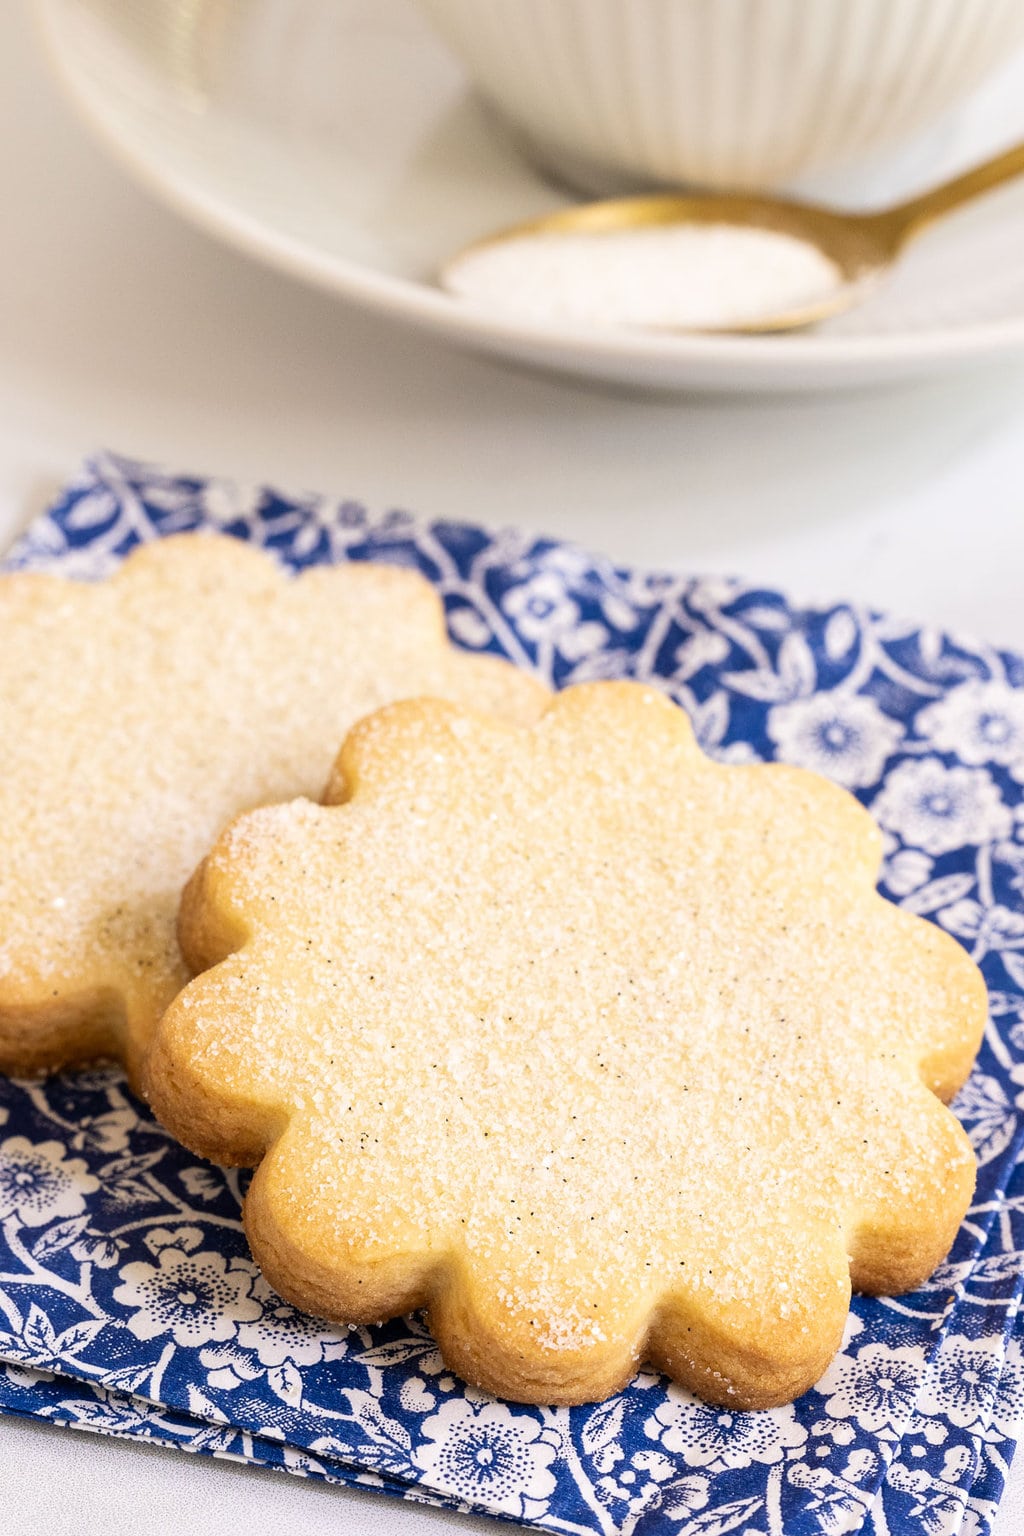 Vertical closeup photo of two French Shortbread Cookies (Sablés Bretons) on a blue and white patterned napkin with a cup of tea in the background.